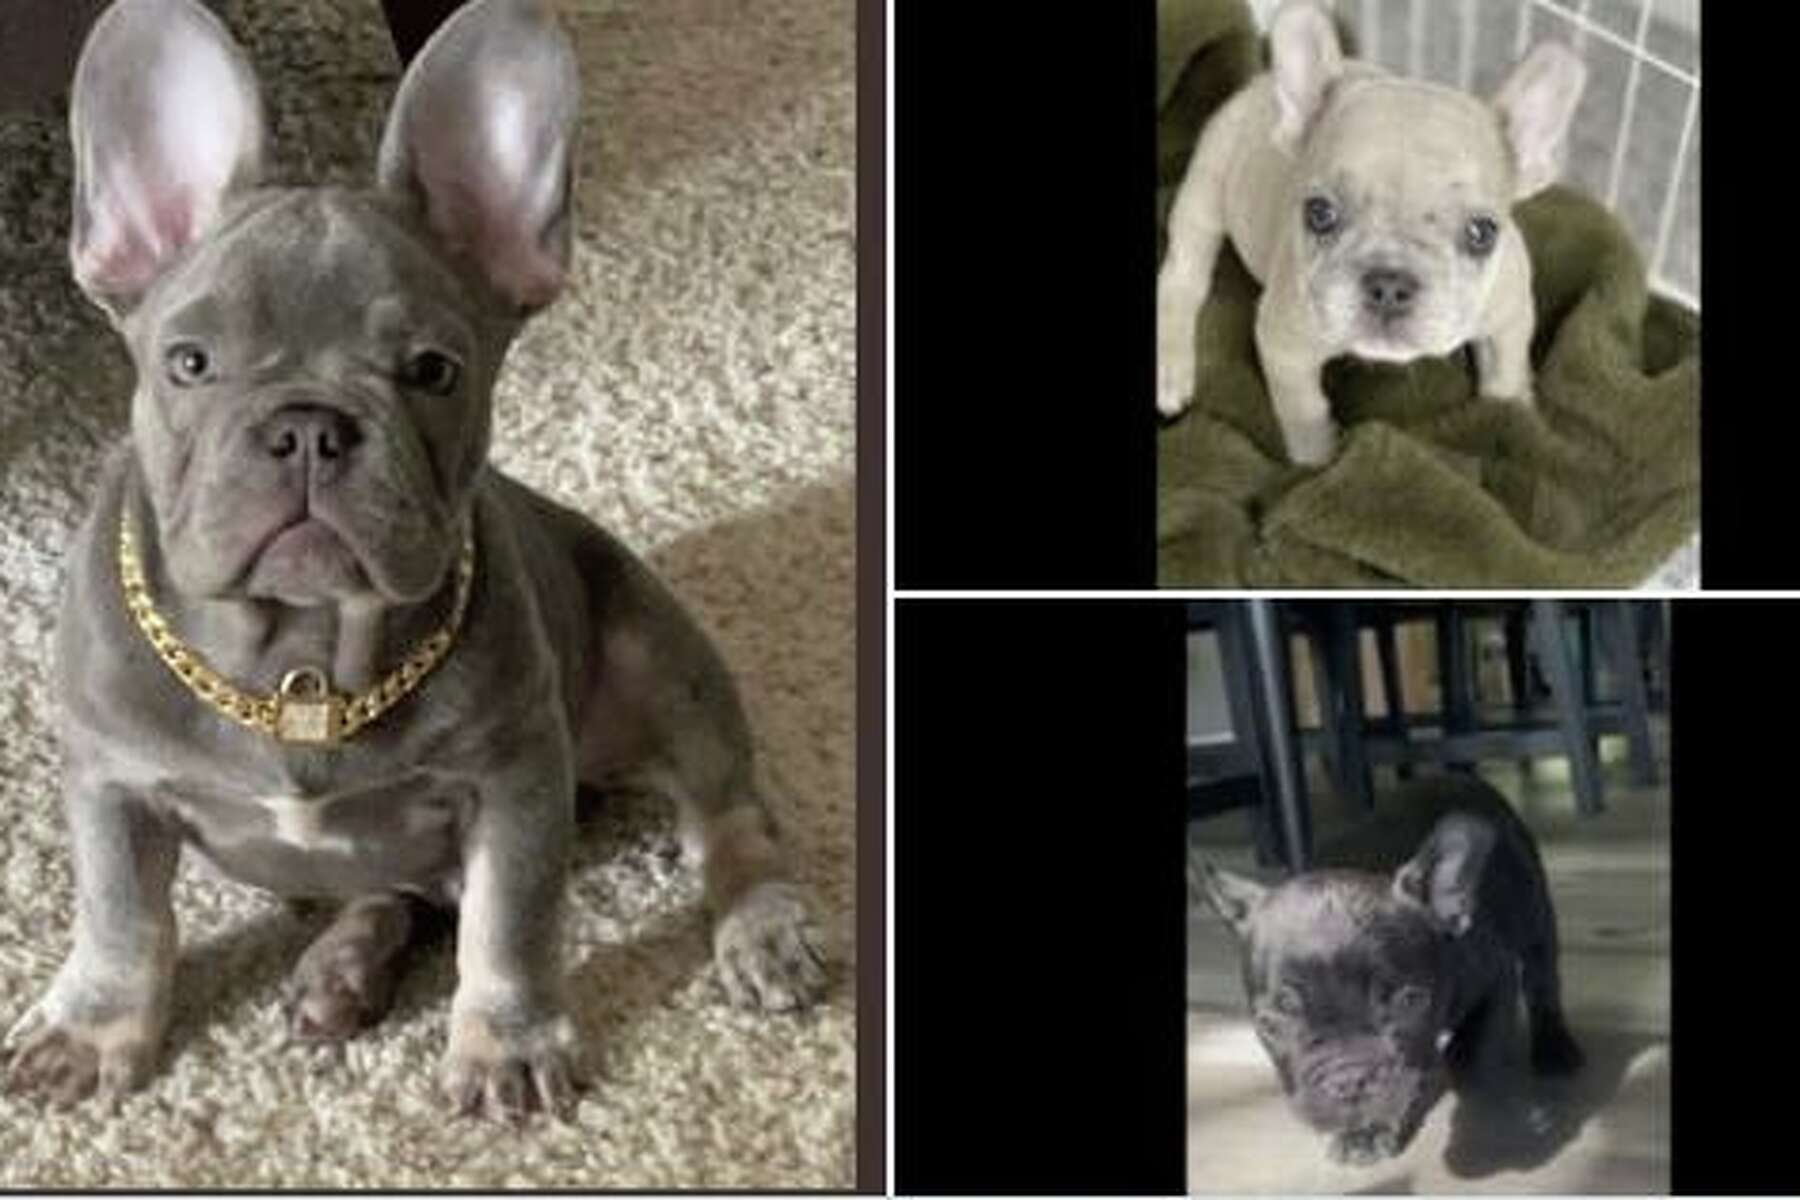 3 French bulldog puppies stolen from Mountain View home